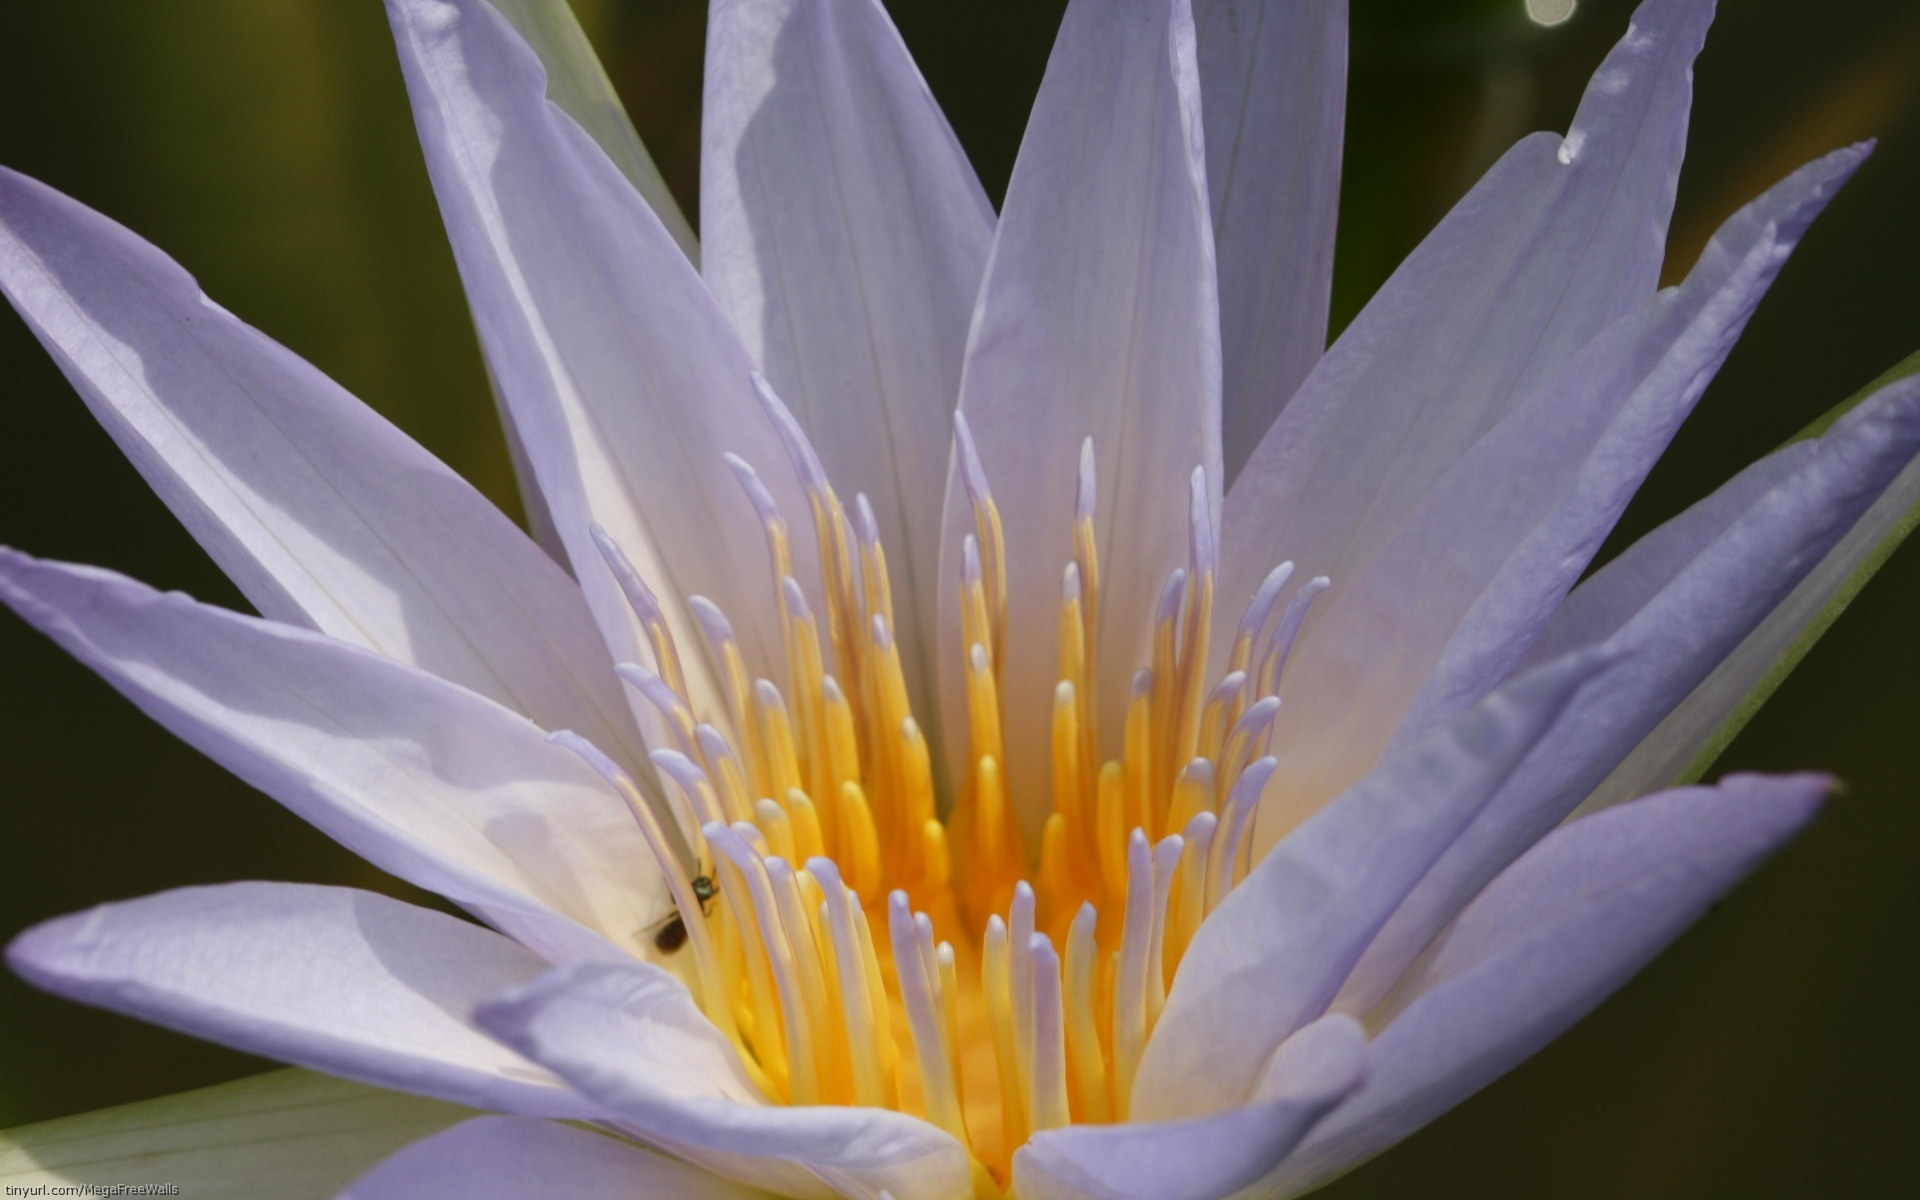 Earth Water Lily HD Wallpaper | Background Image